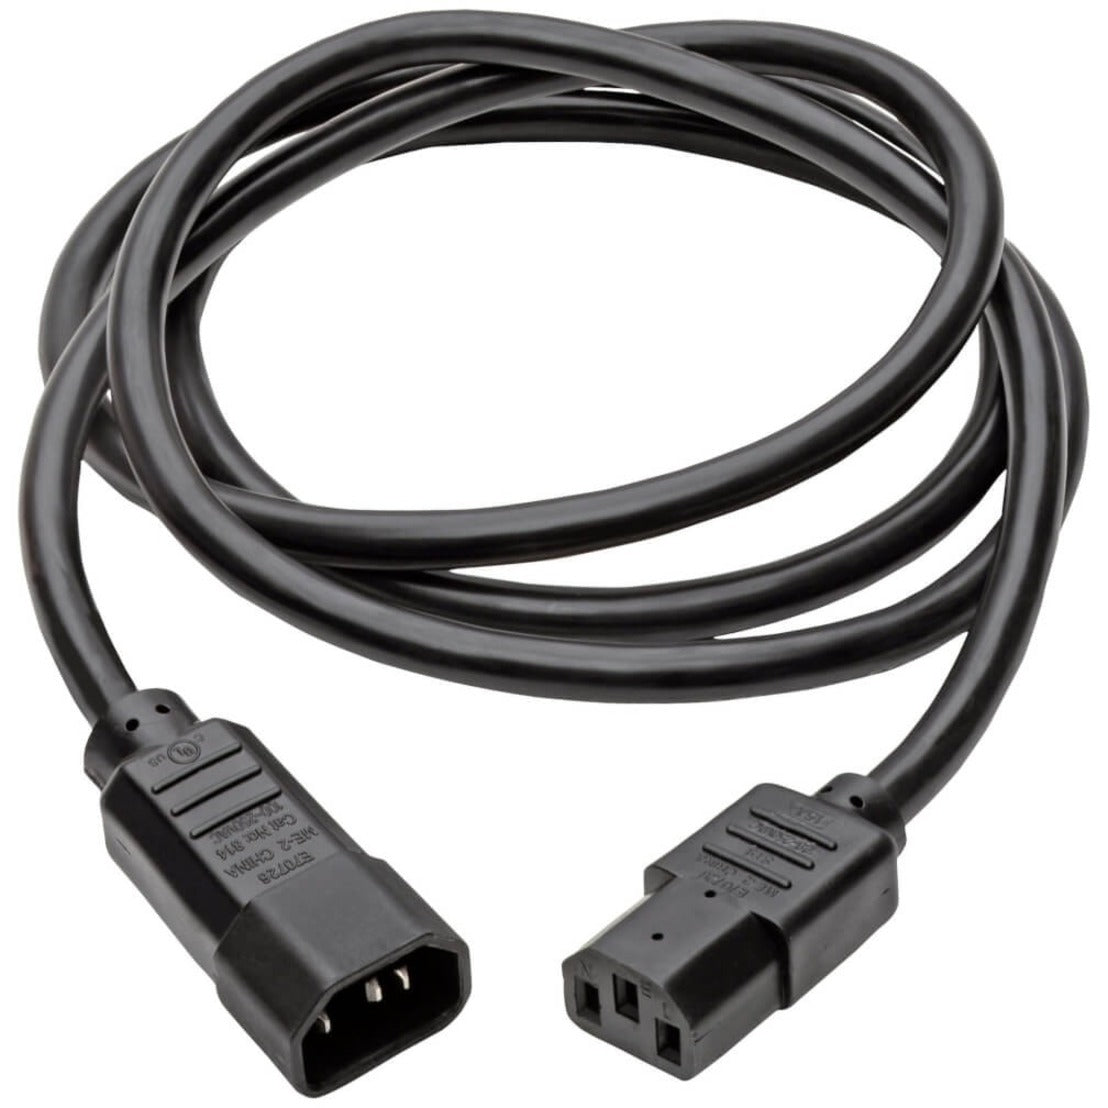 Tripp Lite P005-010 Power Interconnect Cable, 10 ft, 15A 250V AC